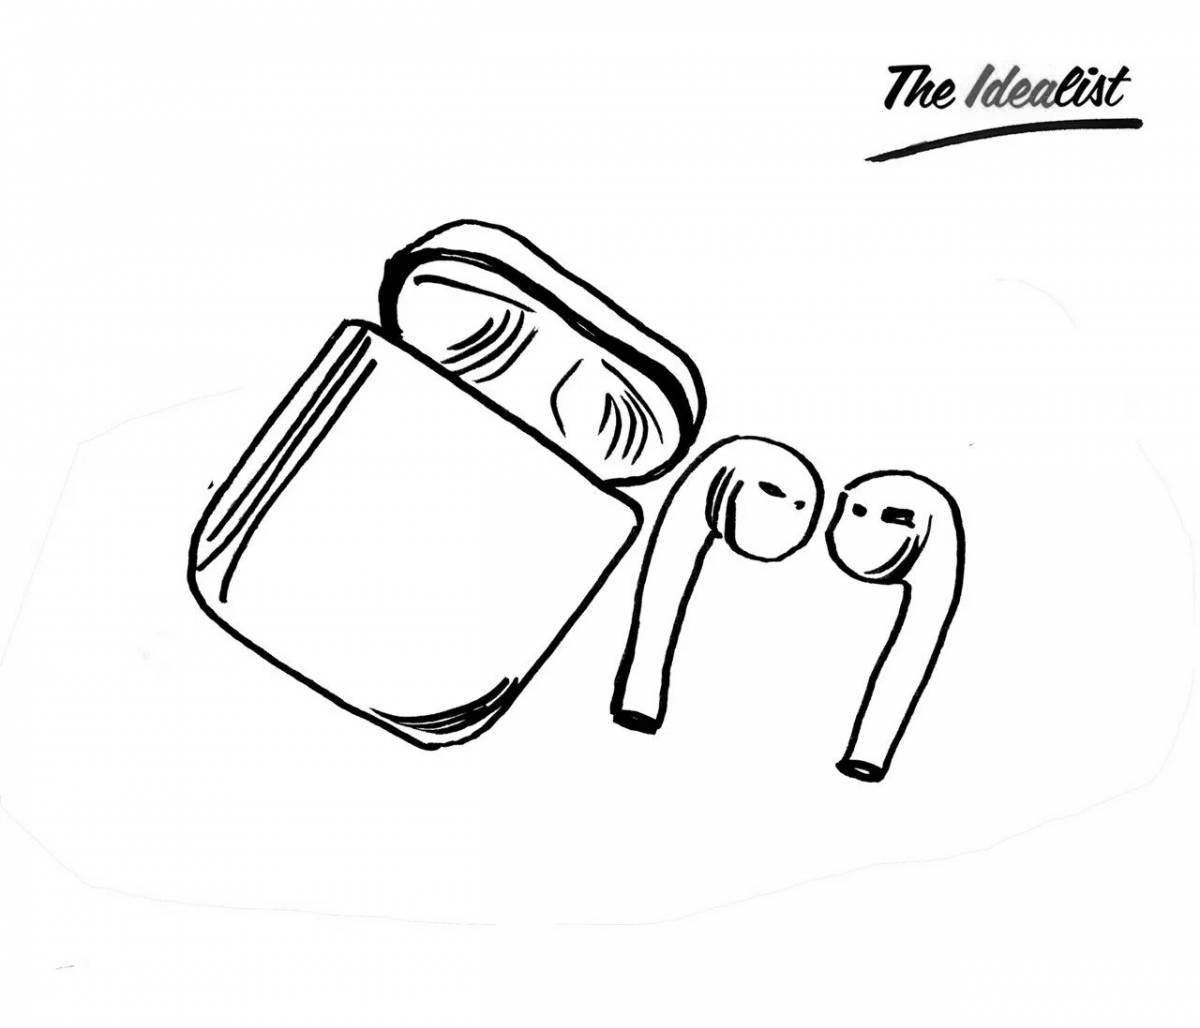 Airpods coloring book with shimmery colors